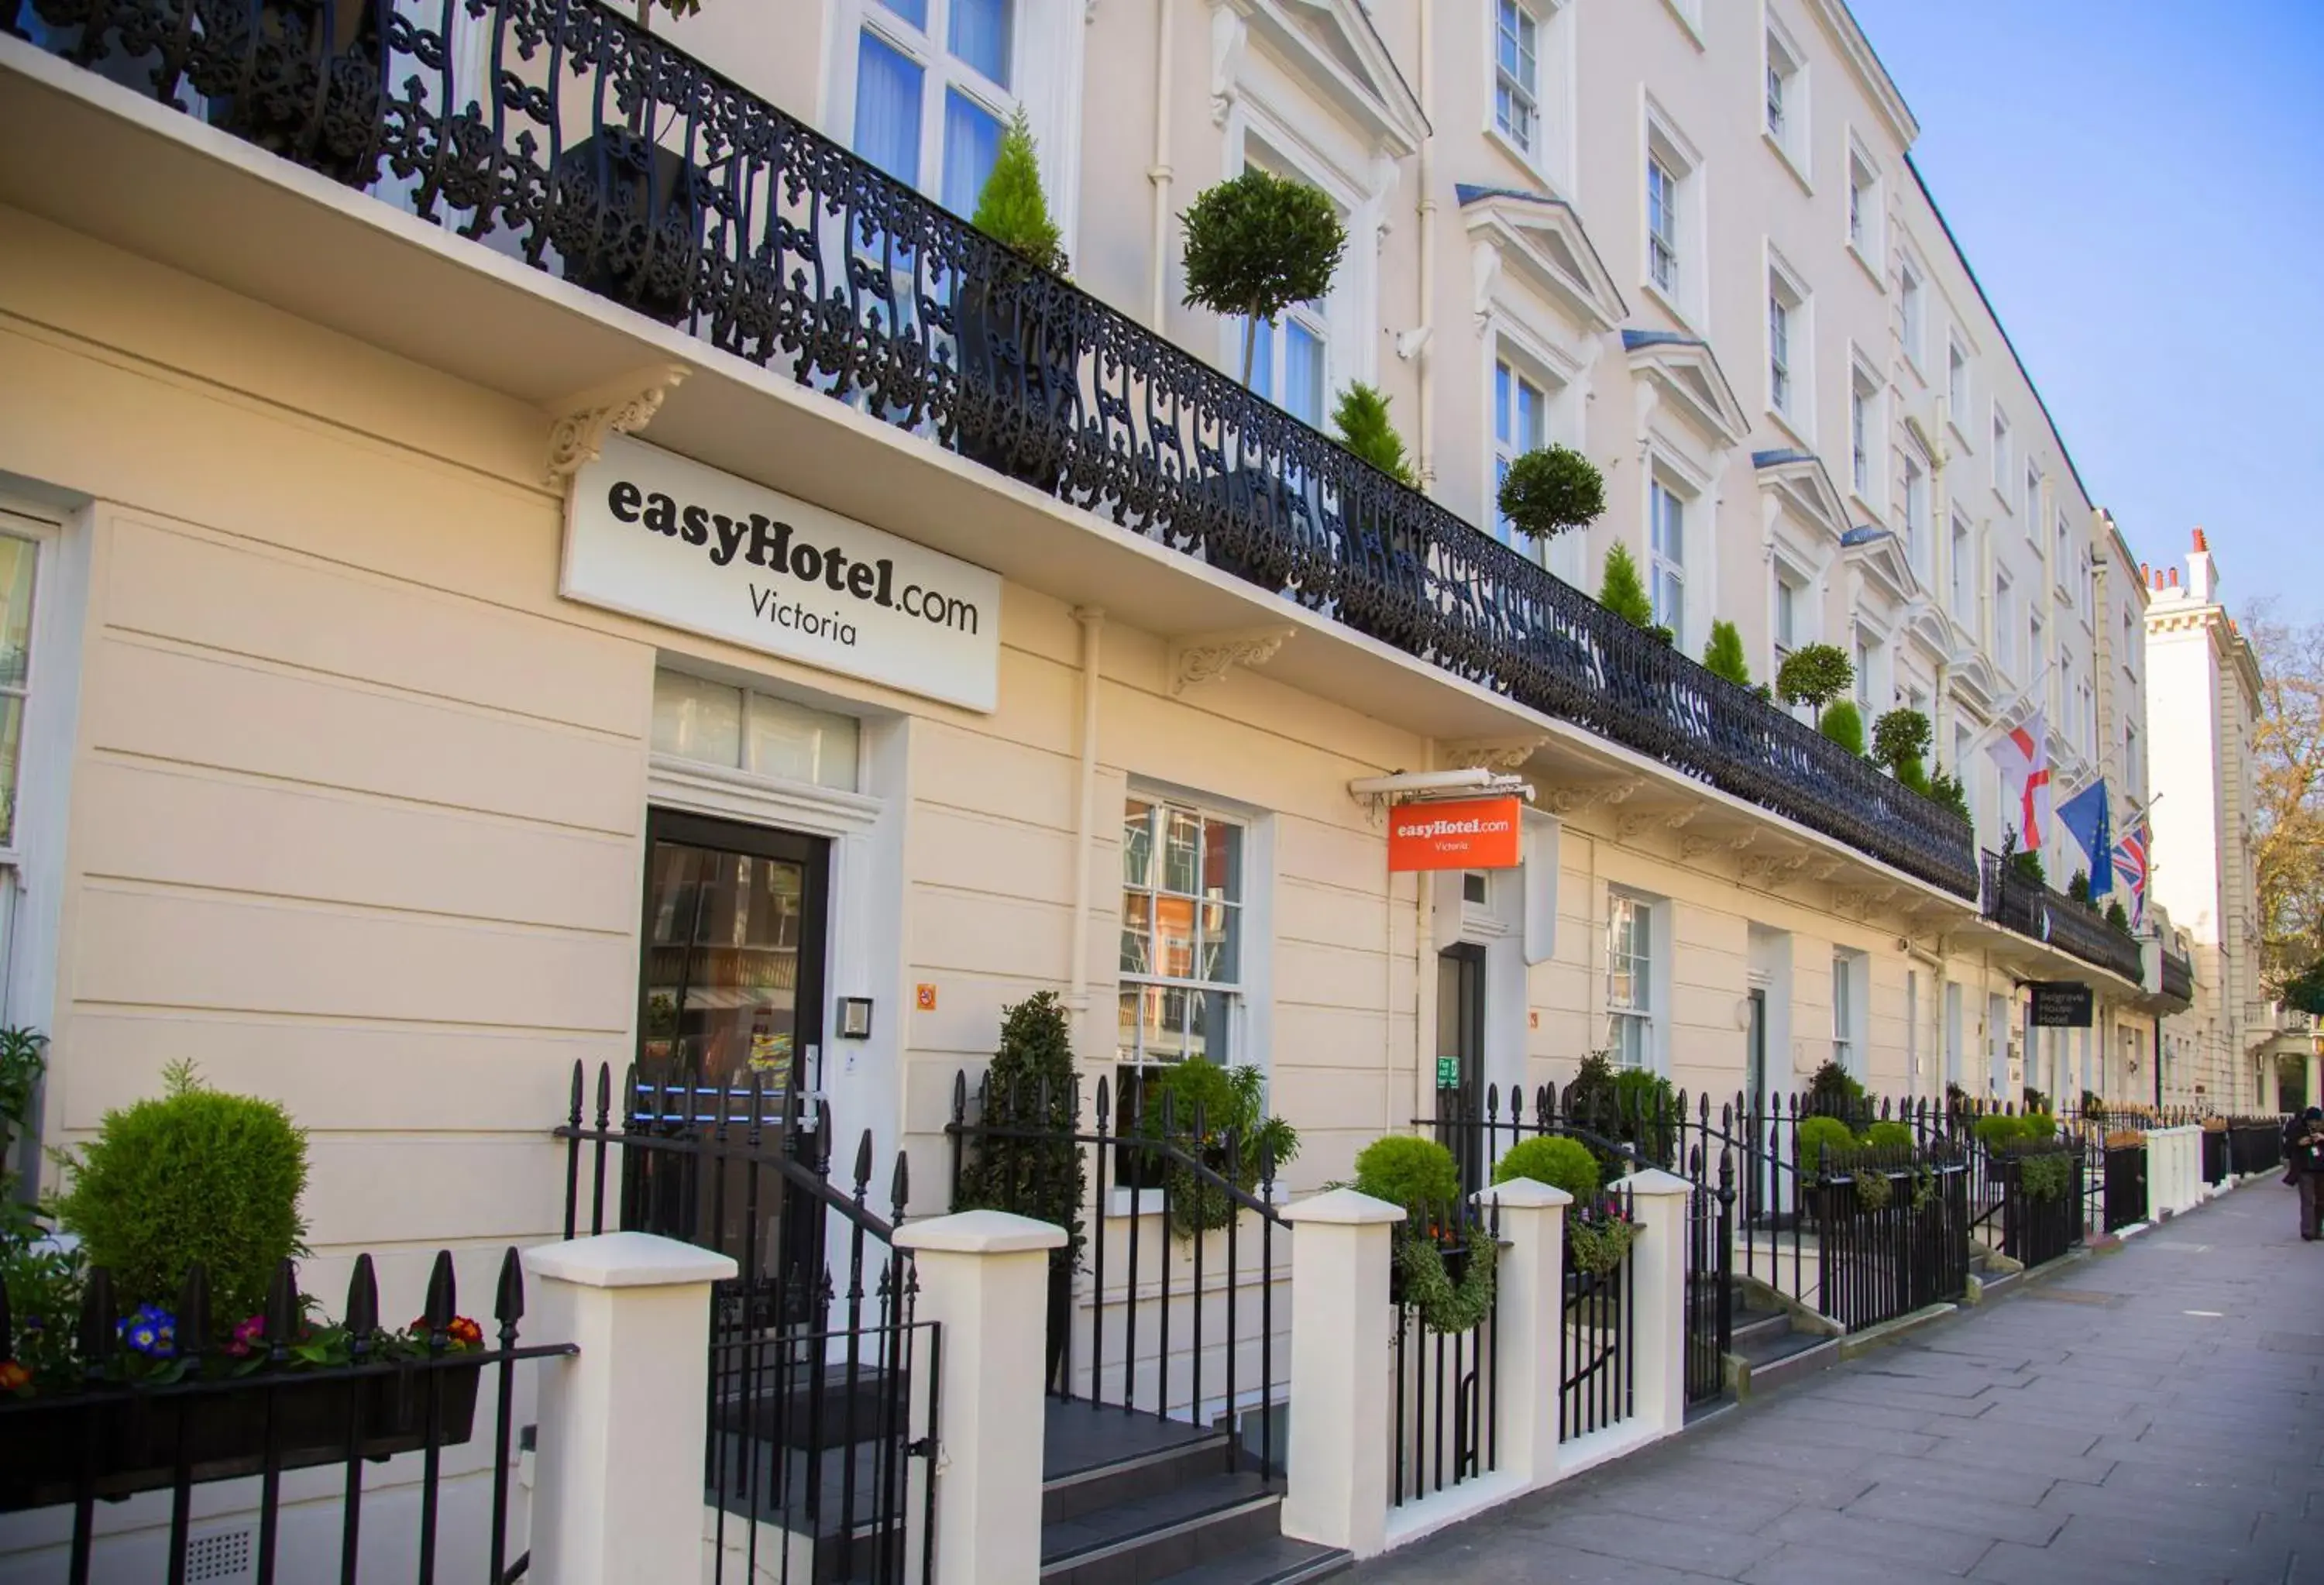 Property Building in easyHotel Victoria